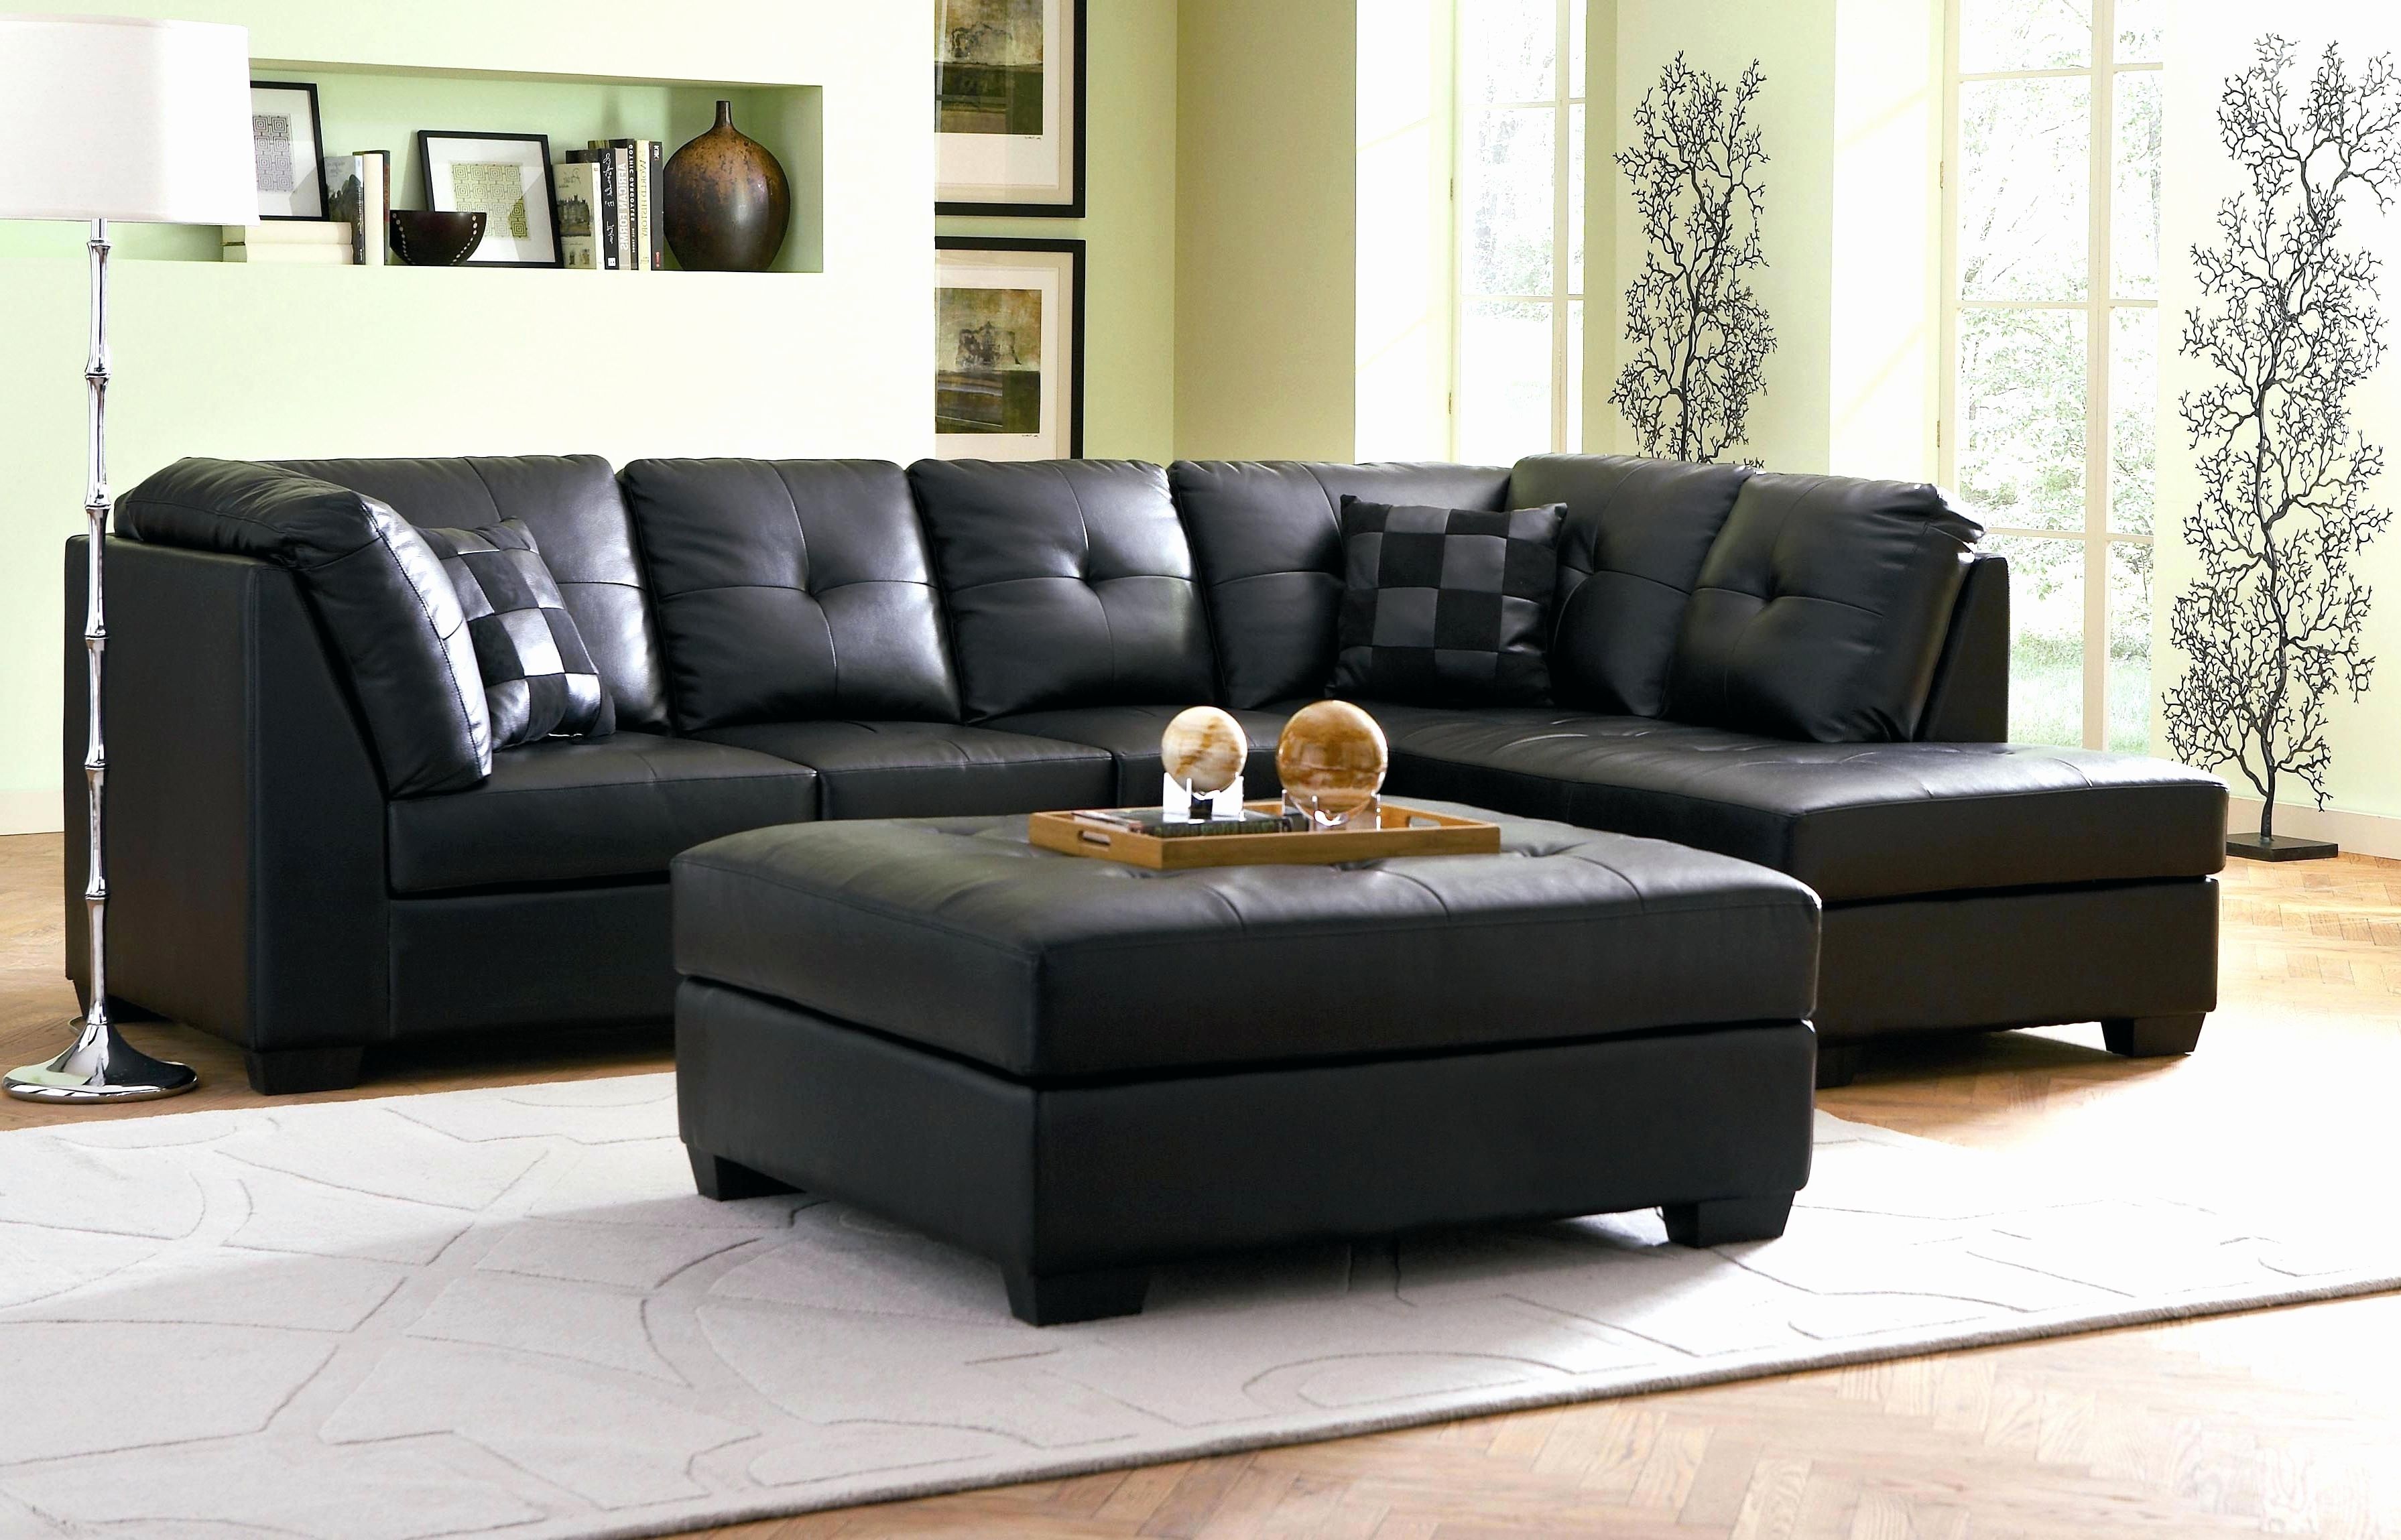 Luxury Reclining Sectional Sofas For Small Spaces 2018 Couches And For Sectional Sofas For Small Spaces 